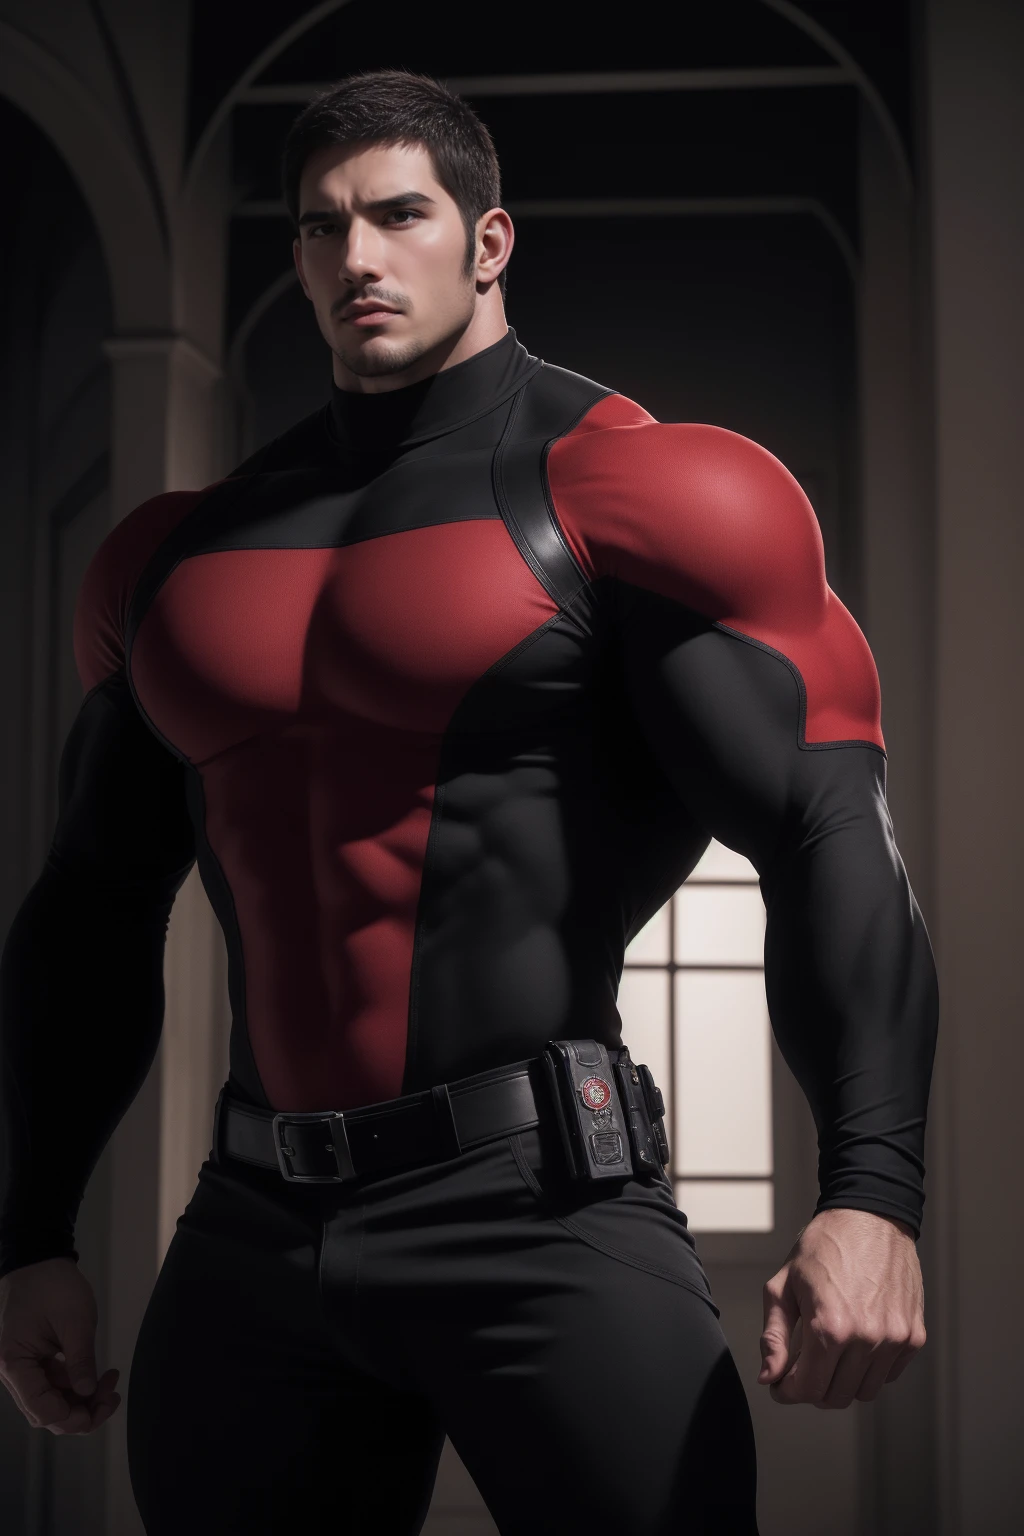 Super muscular man,  Open mouth and scream，Buzz Cut，In a luxurious and noble mansion, Wear a long-sleeved red and black collar tights, Thickened warm elastic texture，The expression is arrogant, High collar long sleeve red and black turtleneck tights, very tight, Regular symmetrical pattern, Highlight muscles, Police uniform pants, Thick thighs，character concept（Resident Evil - Chris Redfield, Chris Redfield）A proud expression, Deep and charming eyes, Heroic male pose, tall Burly, muscular！muscular thighs, tough guy, perfect facial features, High, Burly, Heqiang, Super polished and cool, High Resolution Committee, Charismatic, The sun shines through the customers